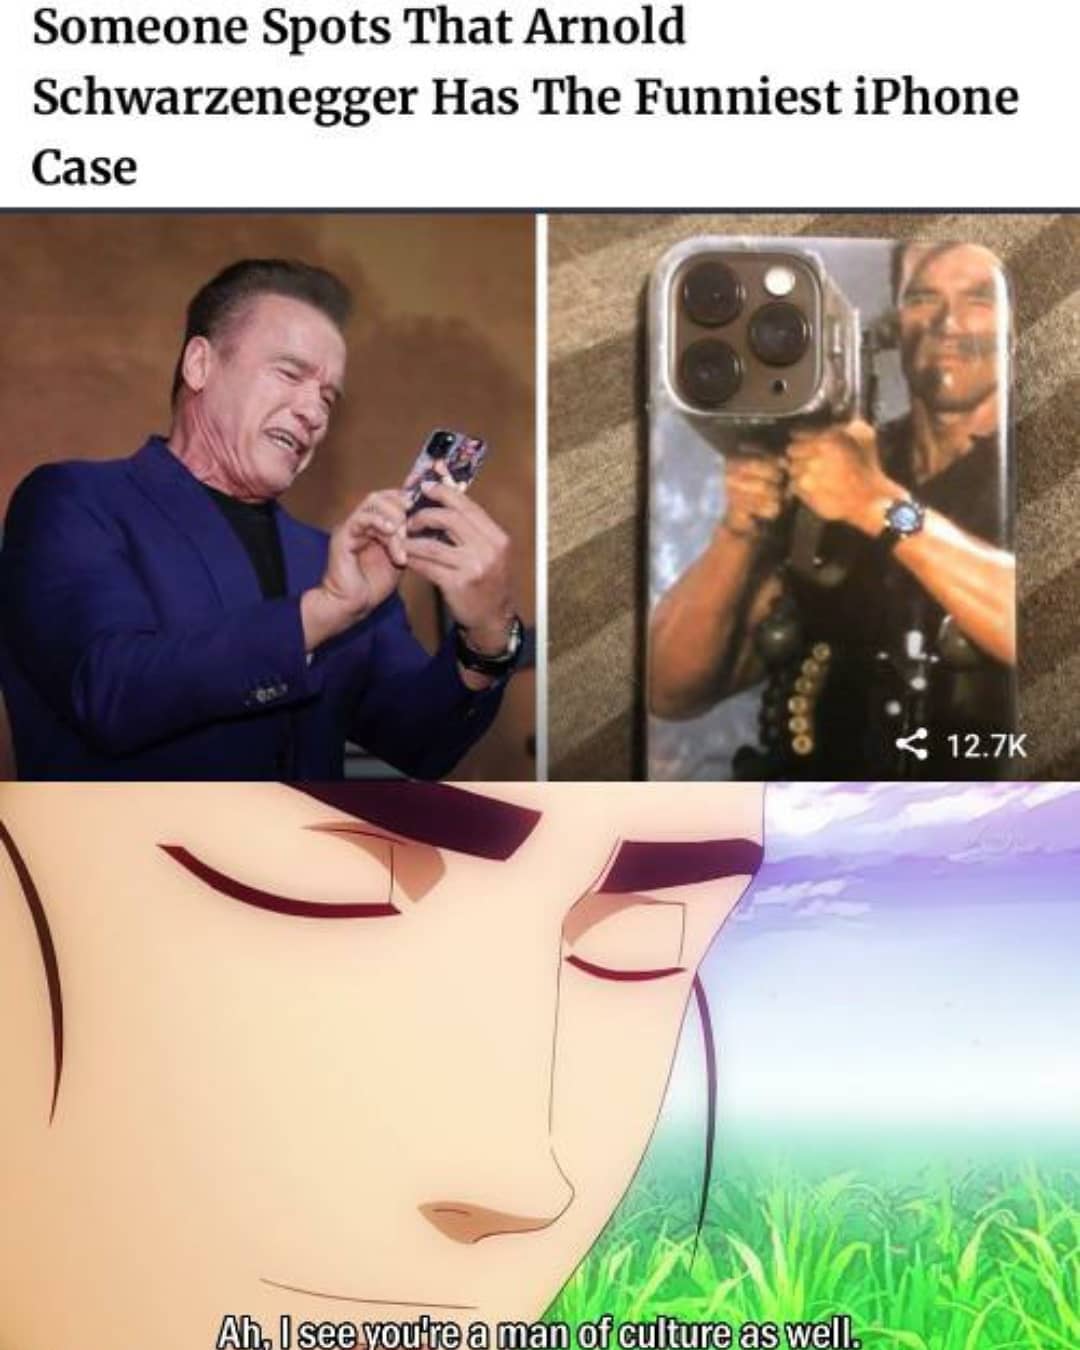 Someone spots that Arnold Schwarzenegger has the funniest Iphone Case.  Ah, I see you're a man of culture as well.